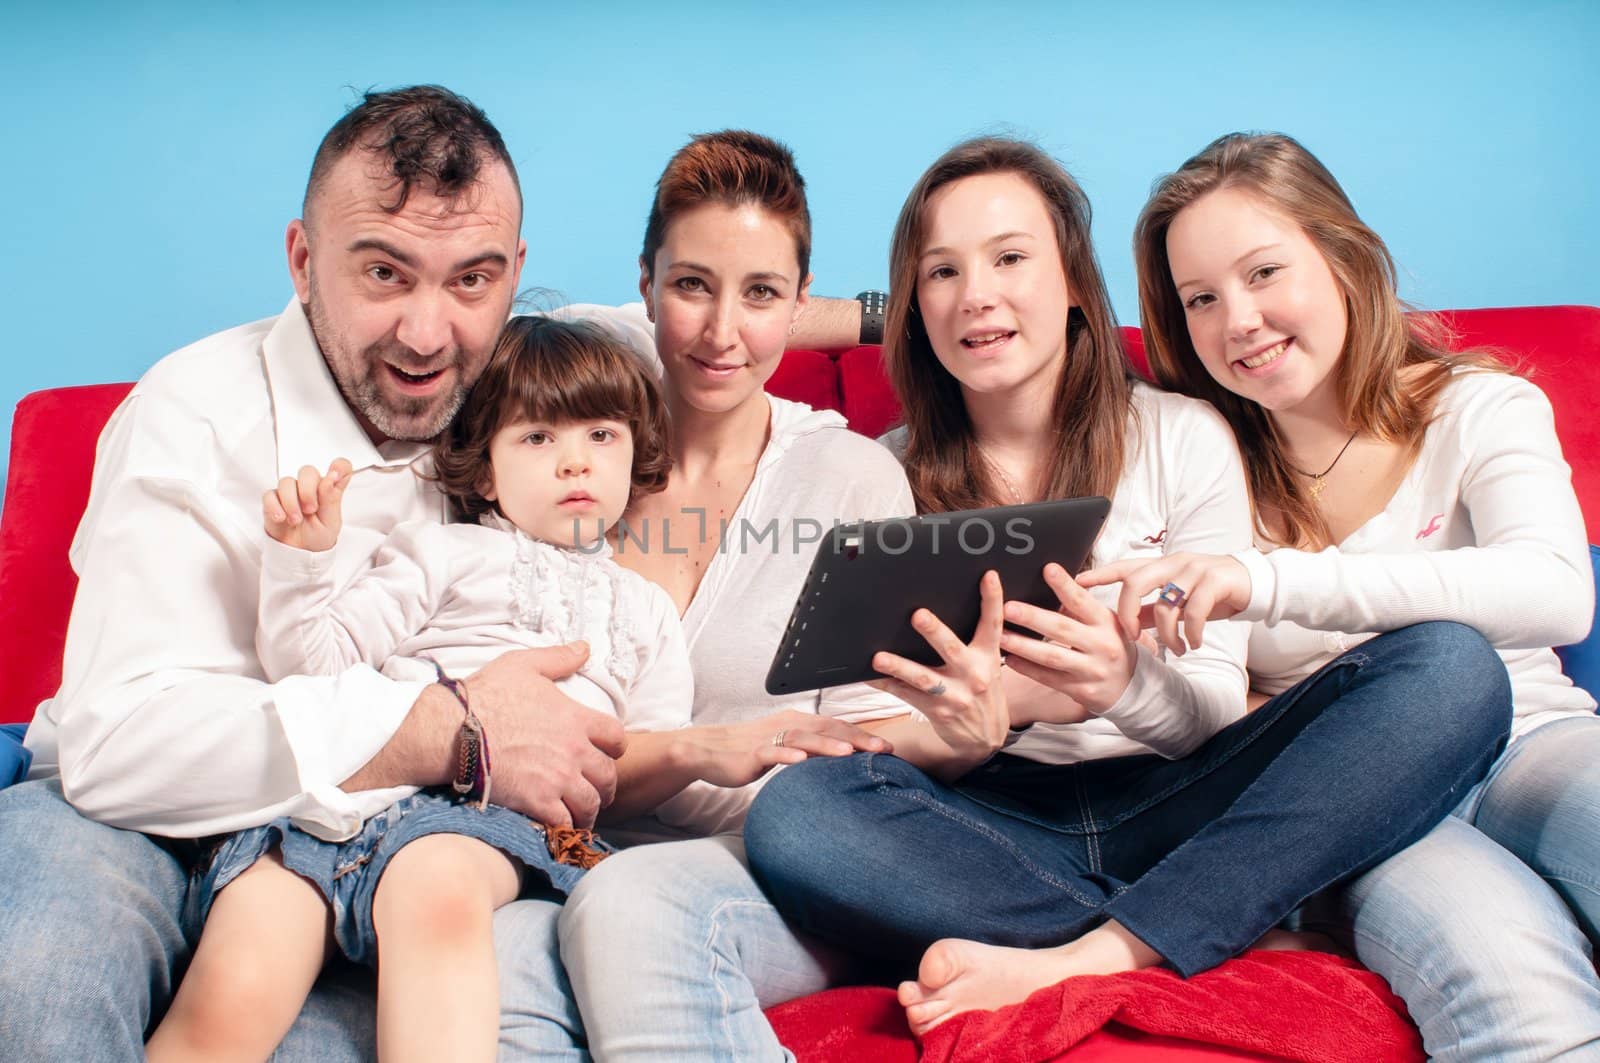 happy family on the couch using tablet in the living room